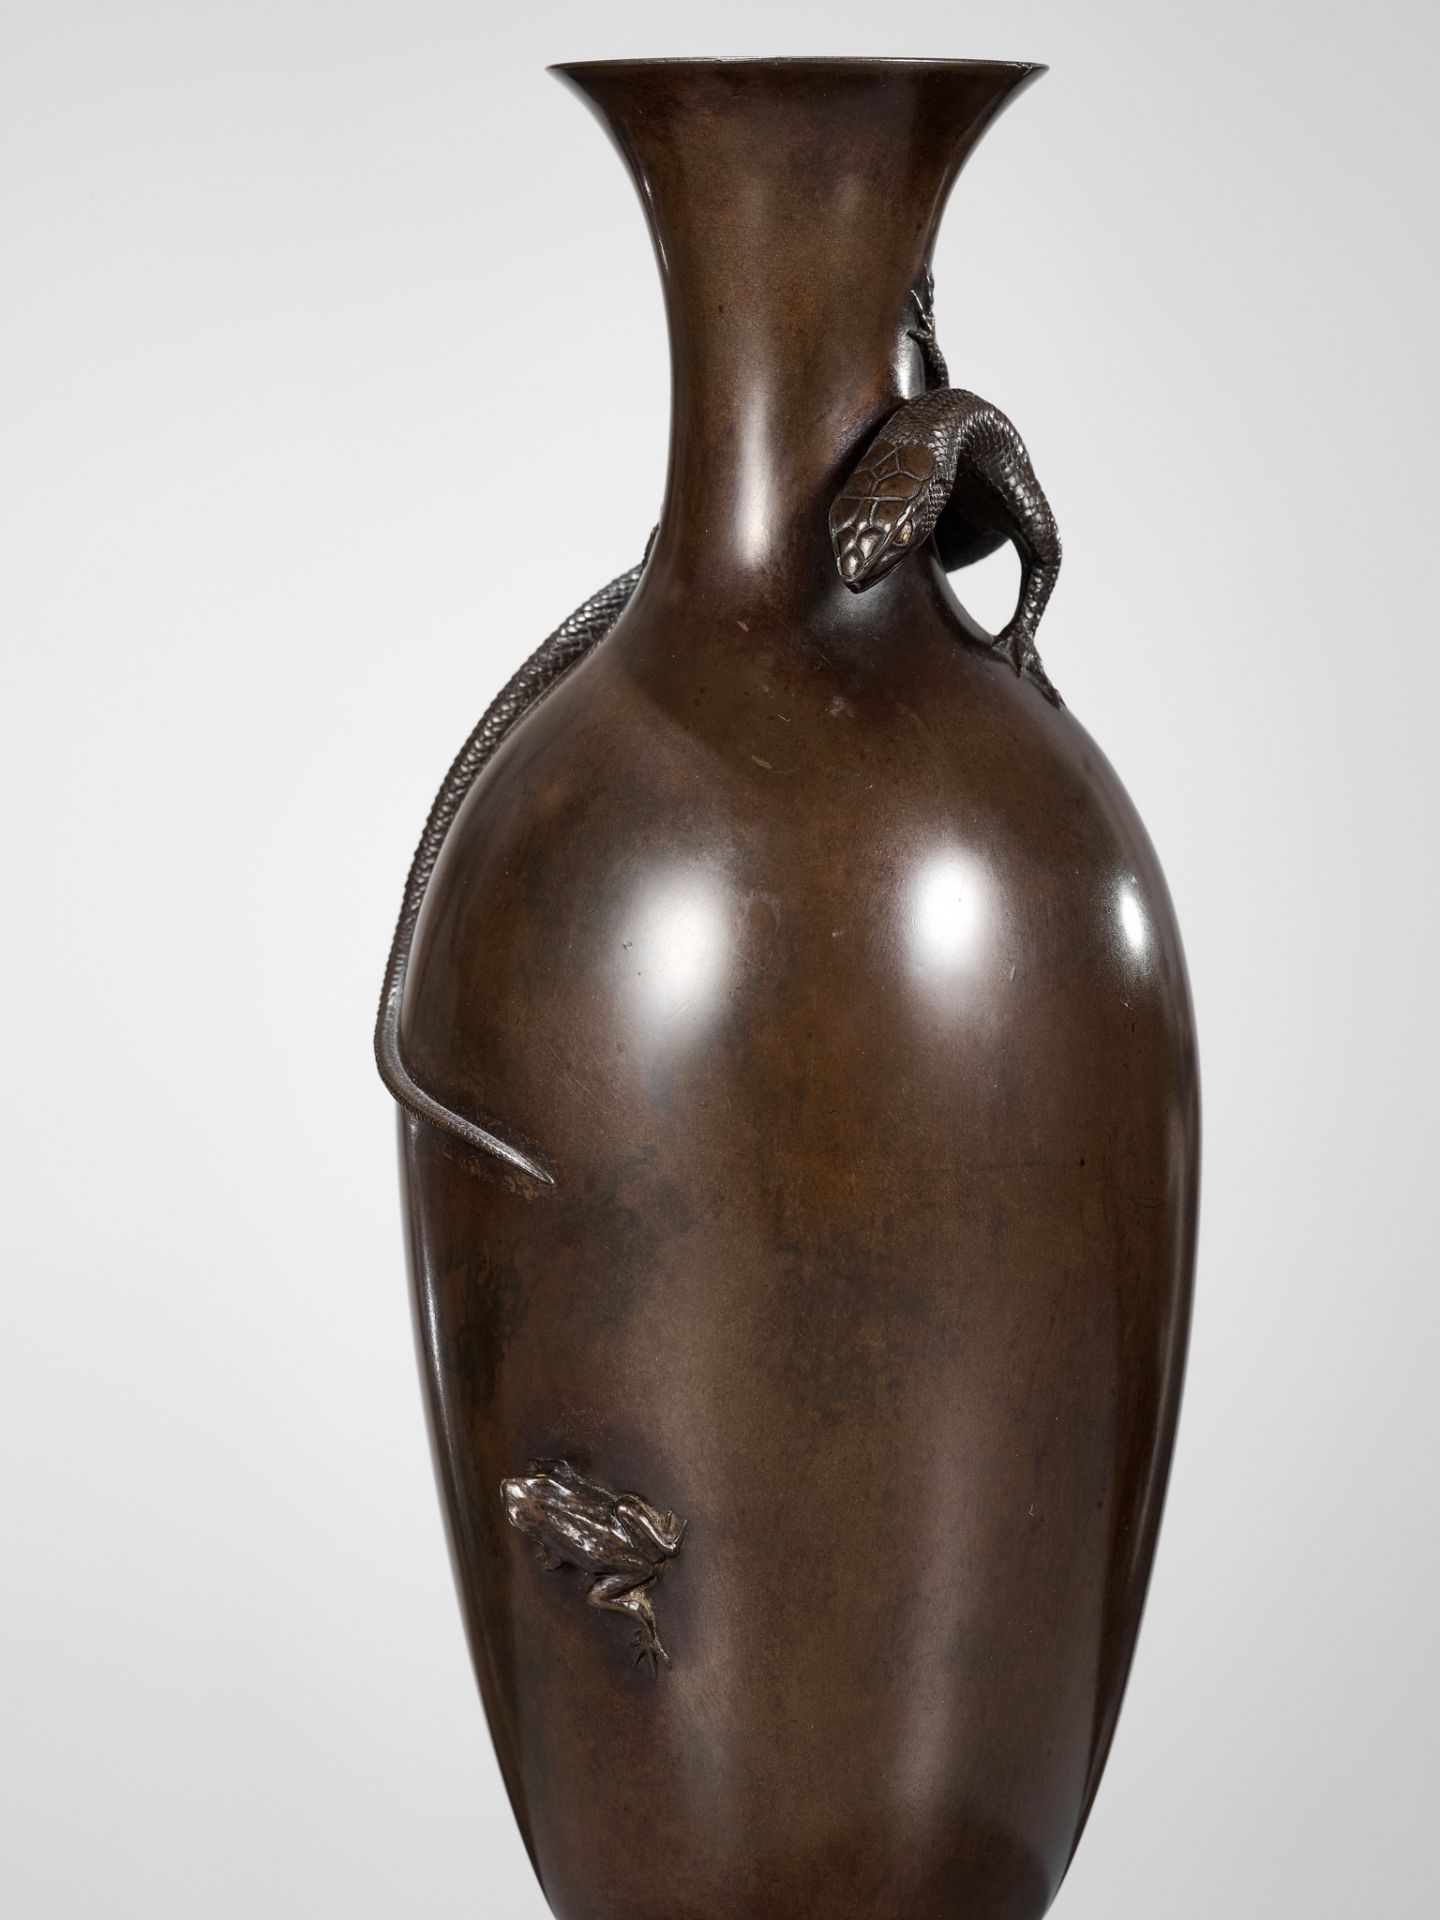 AKICHIKA: A FINE BRONZE VASE WITH LIZARD PREYING ON A FROG